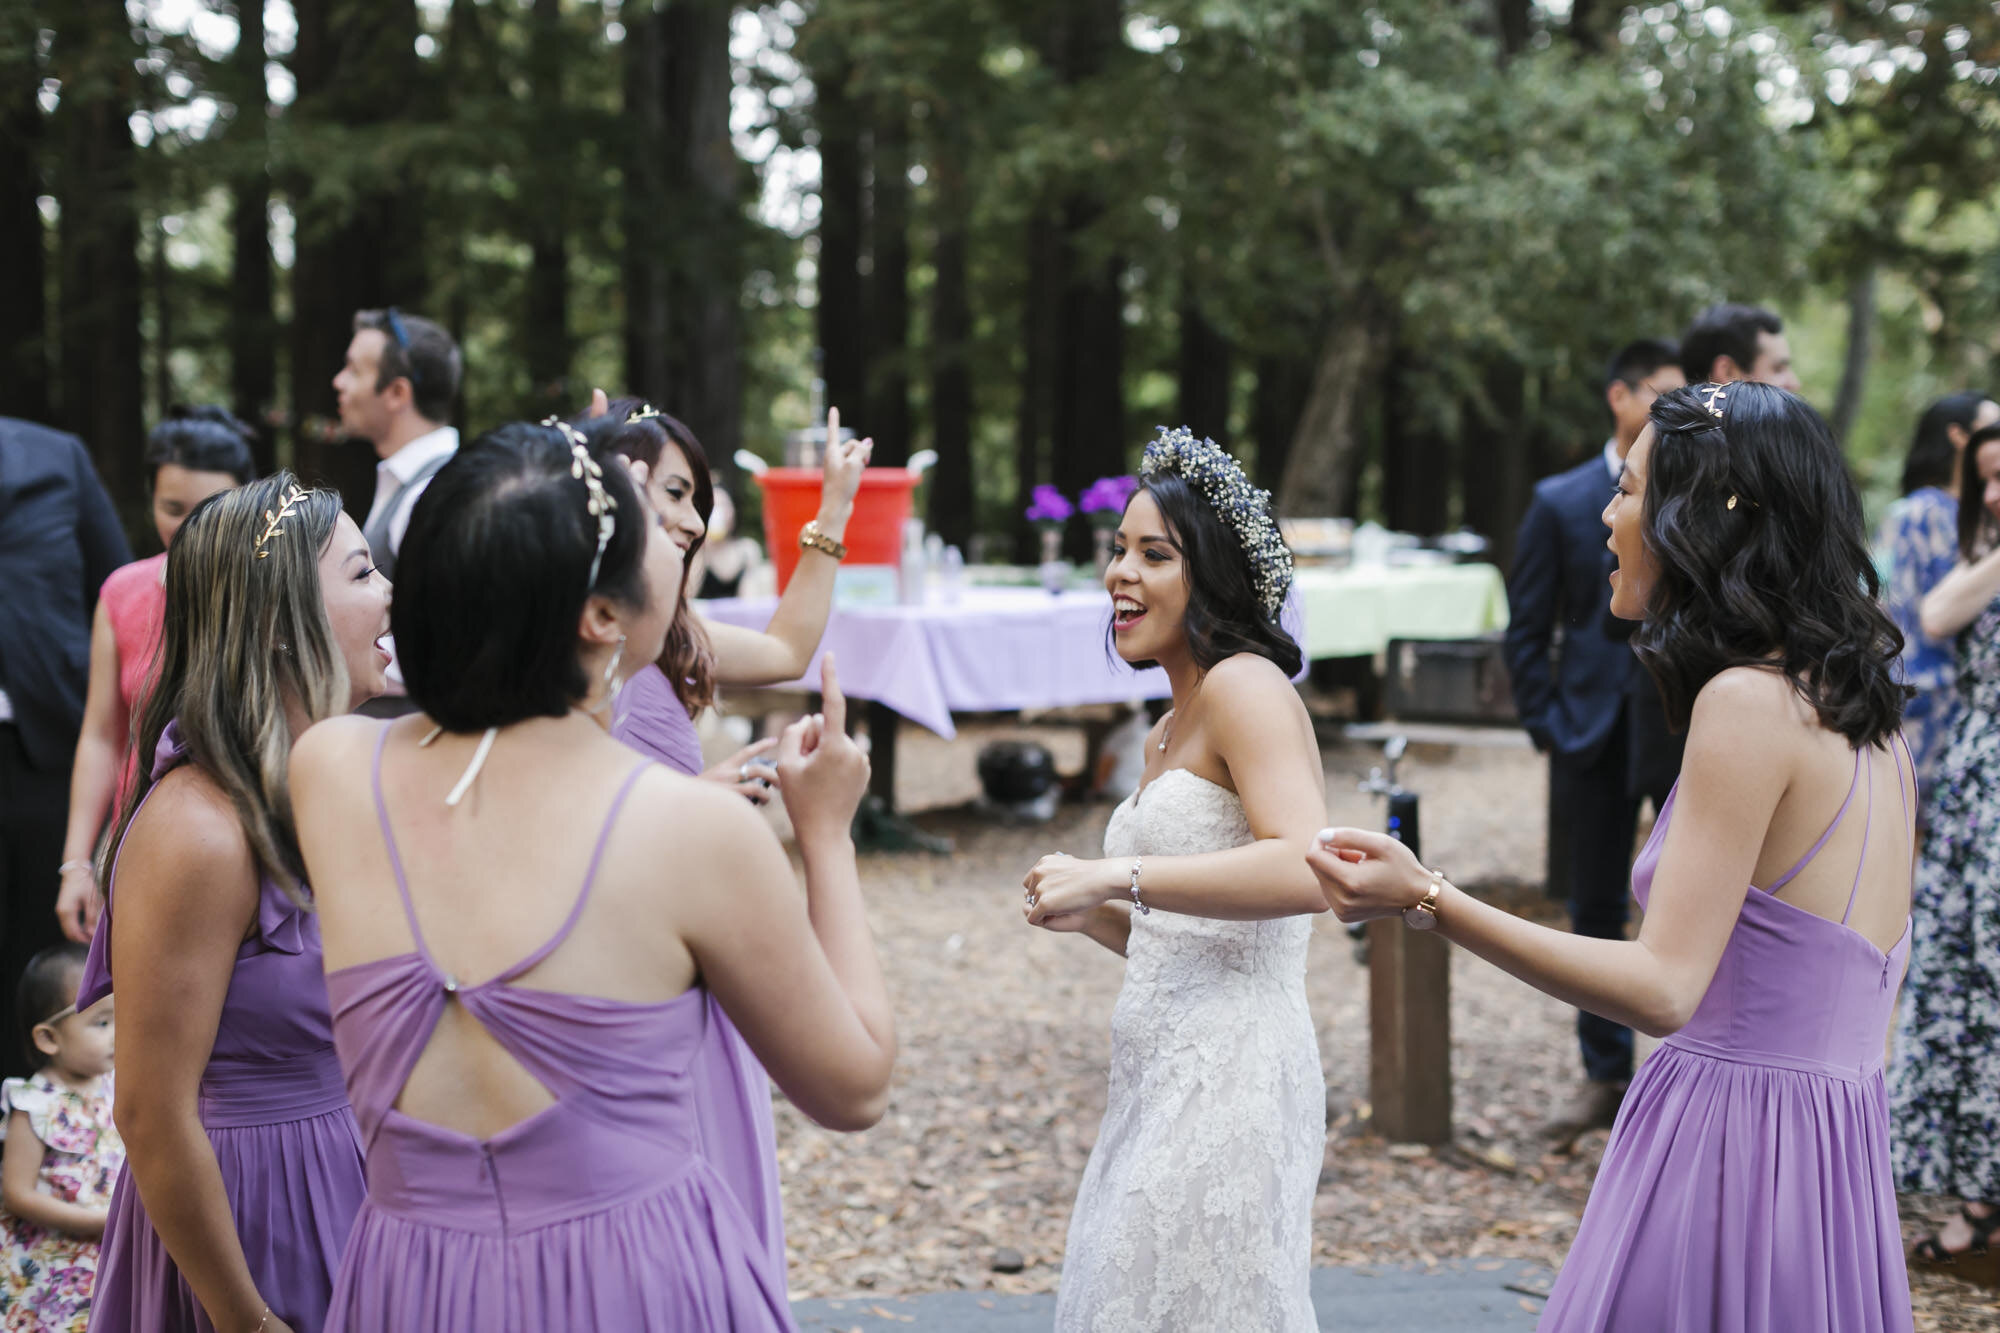 Bride enjoys dancing outdoors in a redwood forest